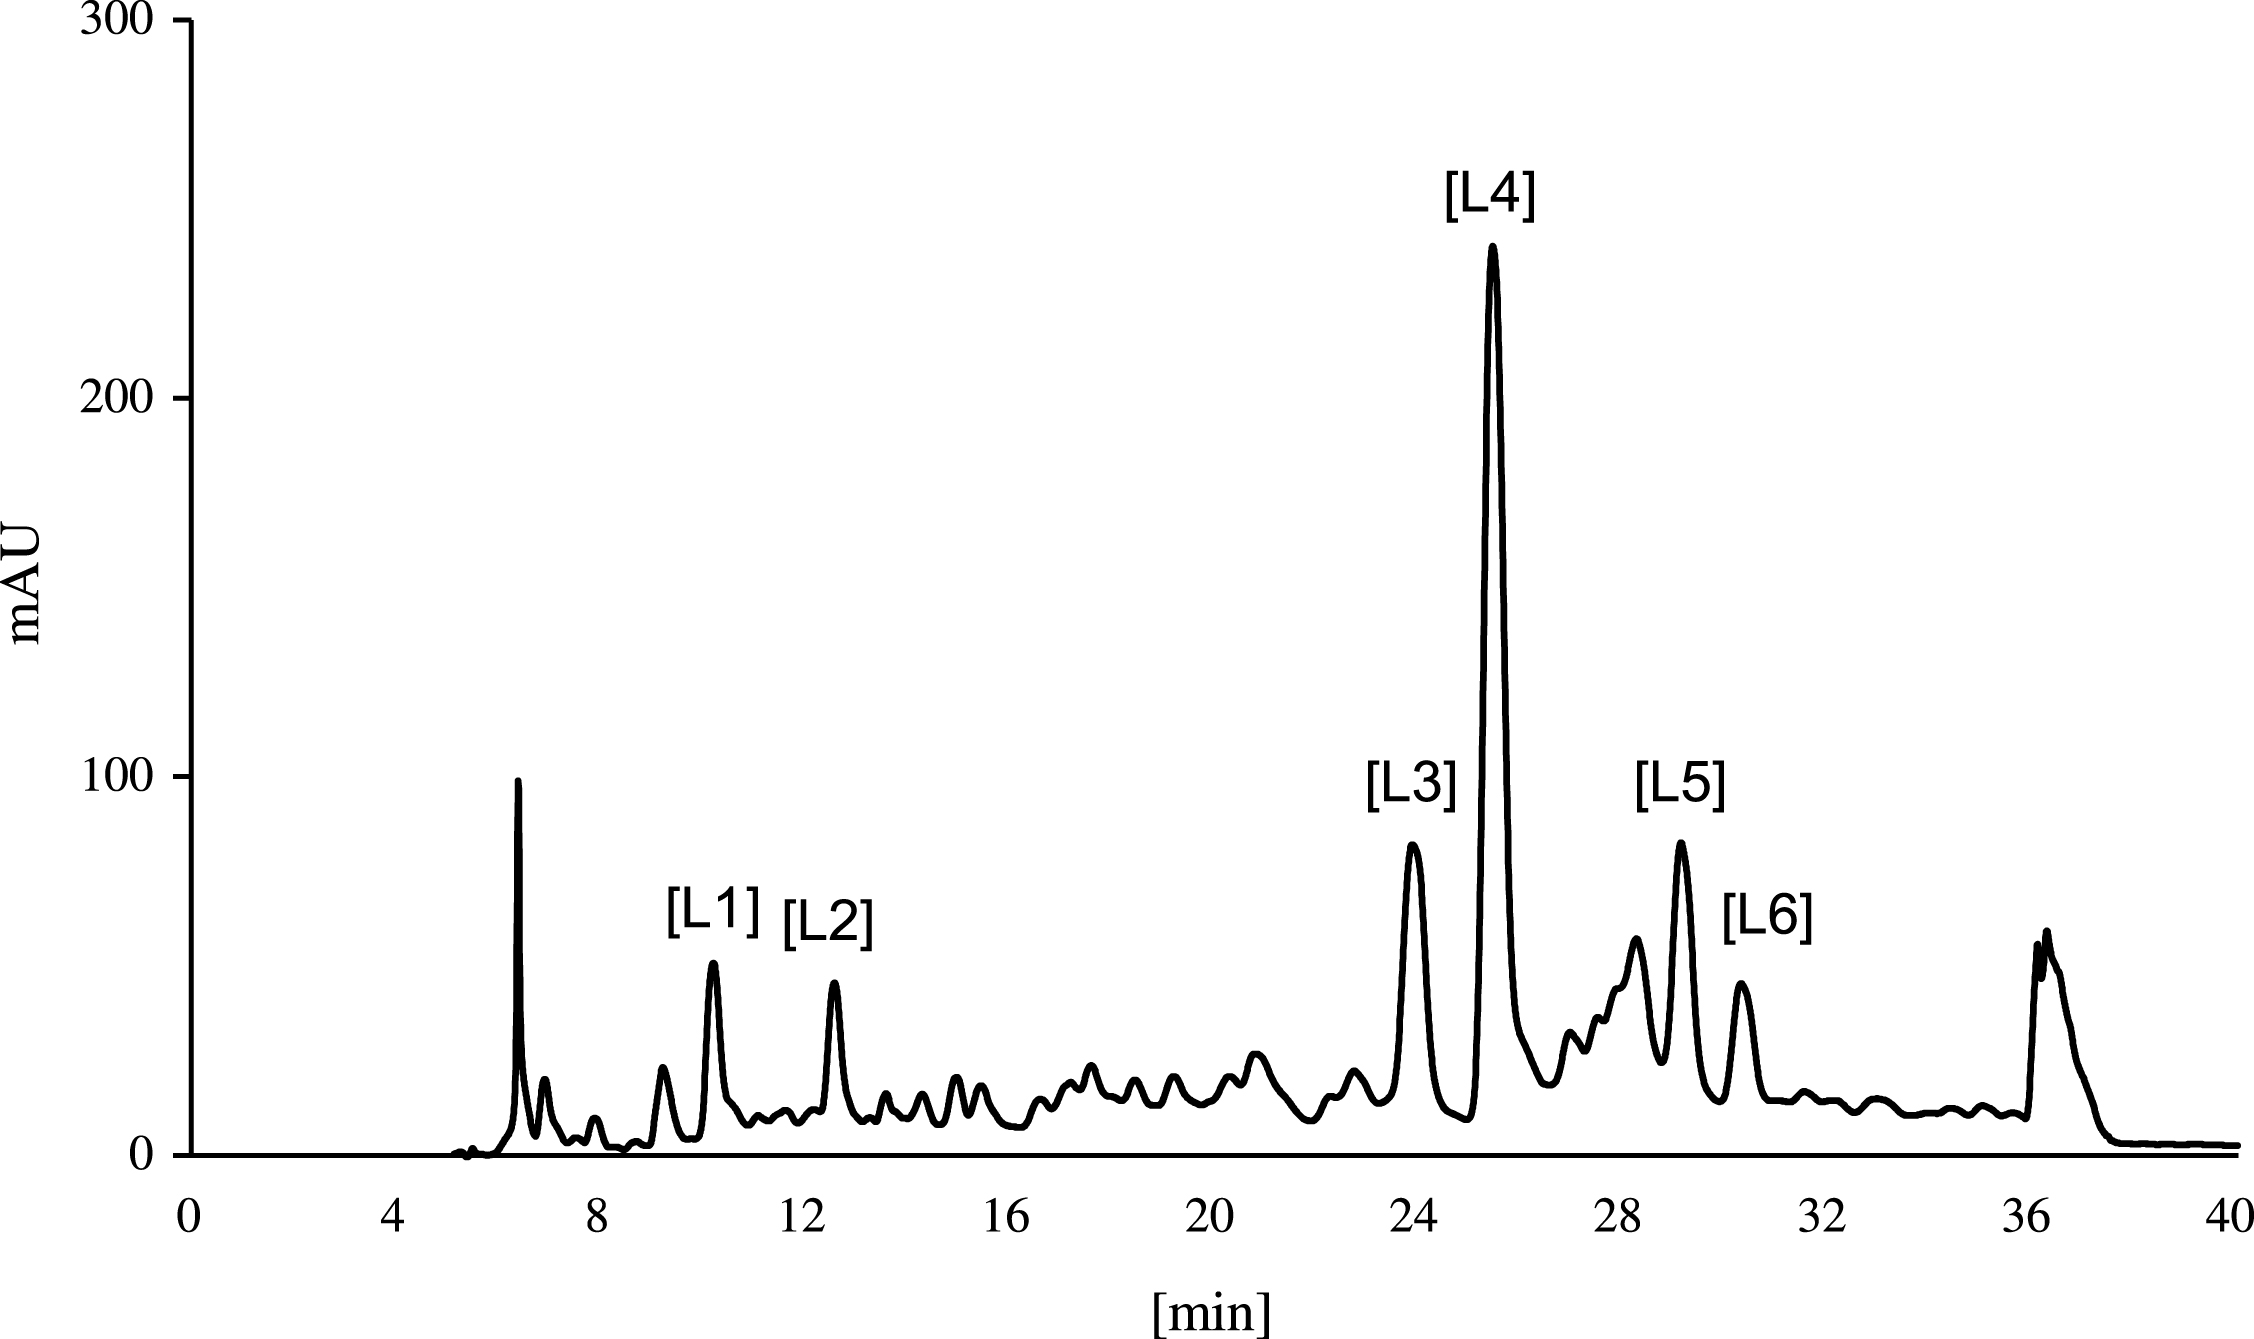 HPLC UV-profile (λ= 260 nm) of polyphenolic compounds from a Joly leaf extract. Bis-HHDP-glucose isomers [L1 – L2], rutin [L3], agrimoniin derivate [L4], kaempferol-coumaroyl [L5], quercetin-3-glucuronide [L6].